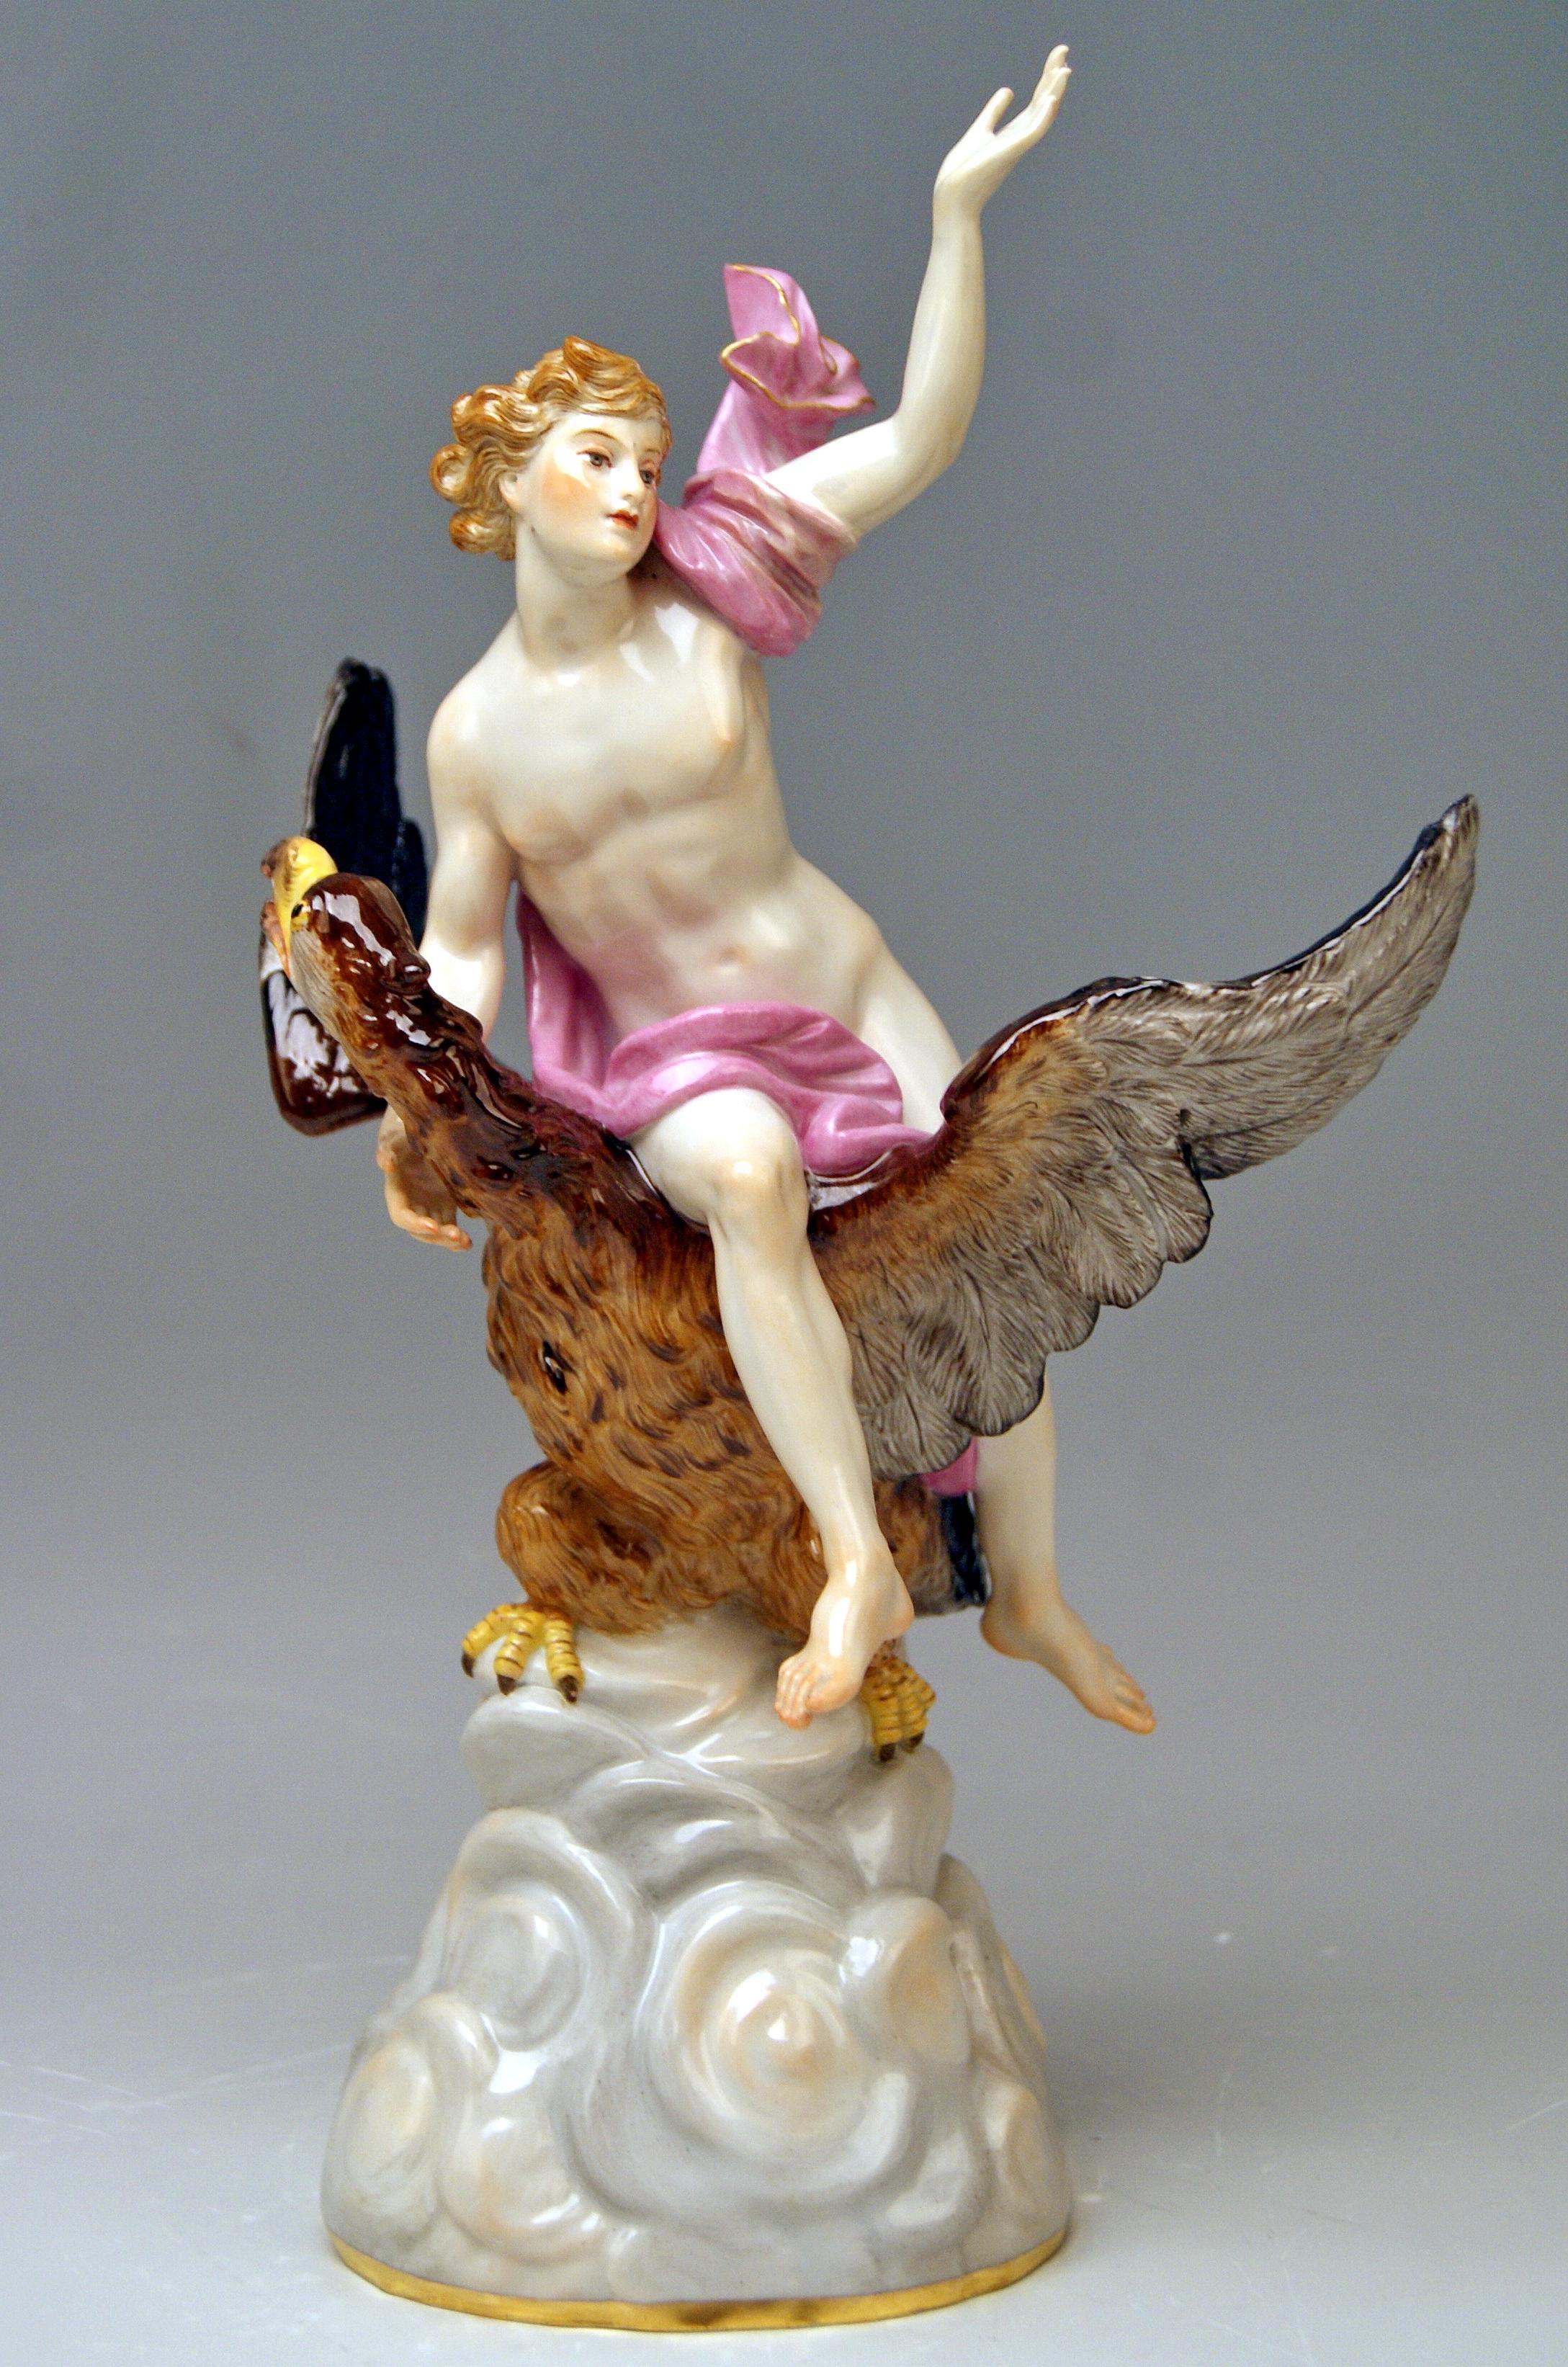 Ganymede riding on eagle based on clouds

Manufactory: Meissen
Hallmarked: 
Blue Meissen Sword Mark With Pommels on Hilts (underglazed)
model number 530 / painter's number 56 / former's number 42
First quality 
Dating: made circa